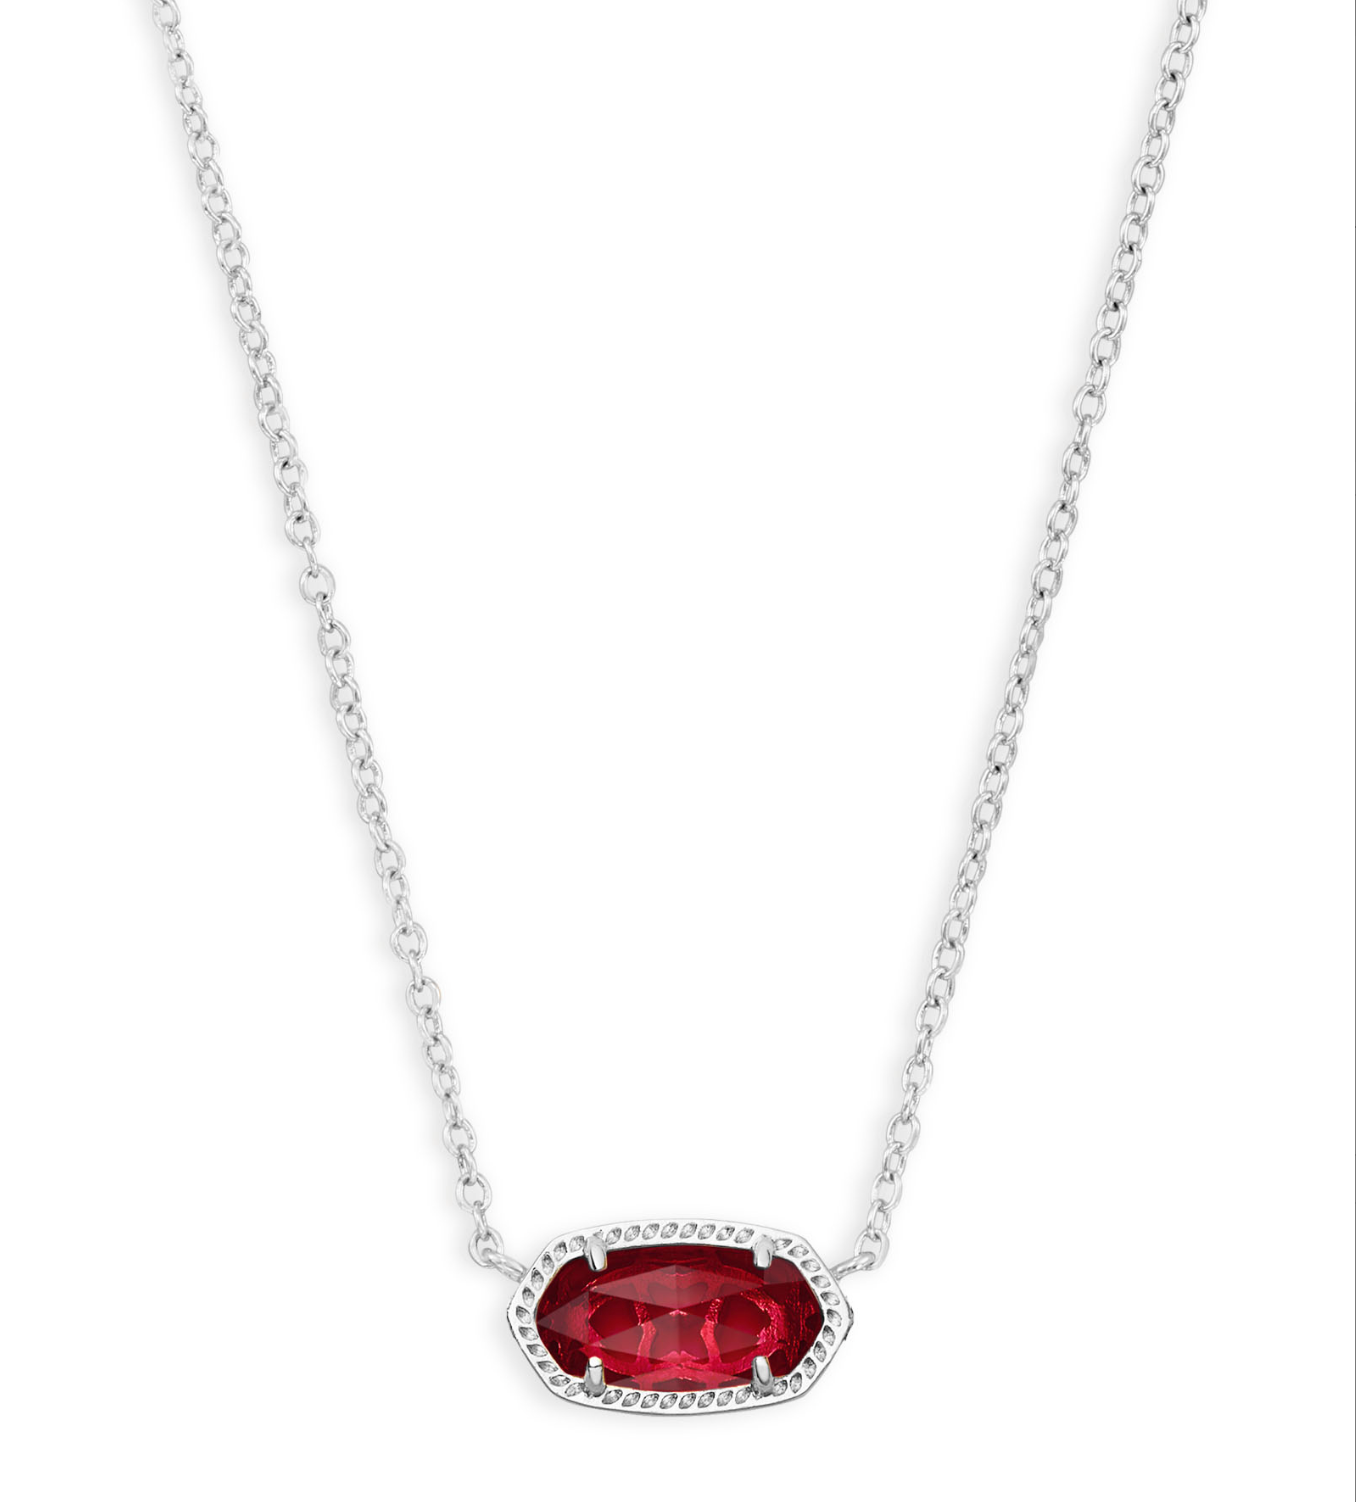 KENDRA SCOTT Elisa Silver Pendant Necklace in Clear Berry - The Street Boutique 